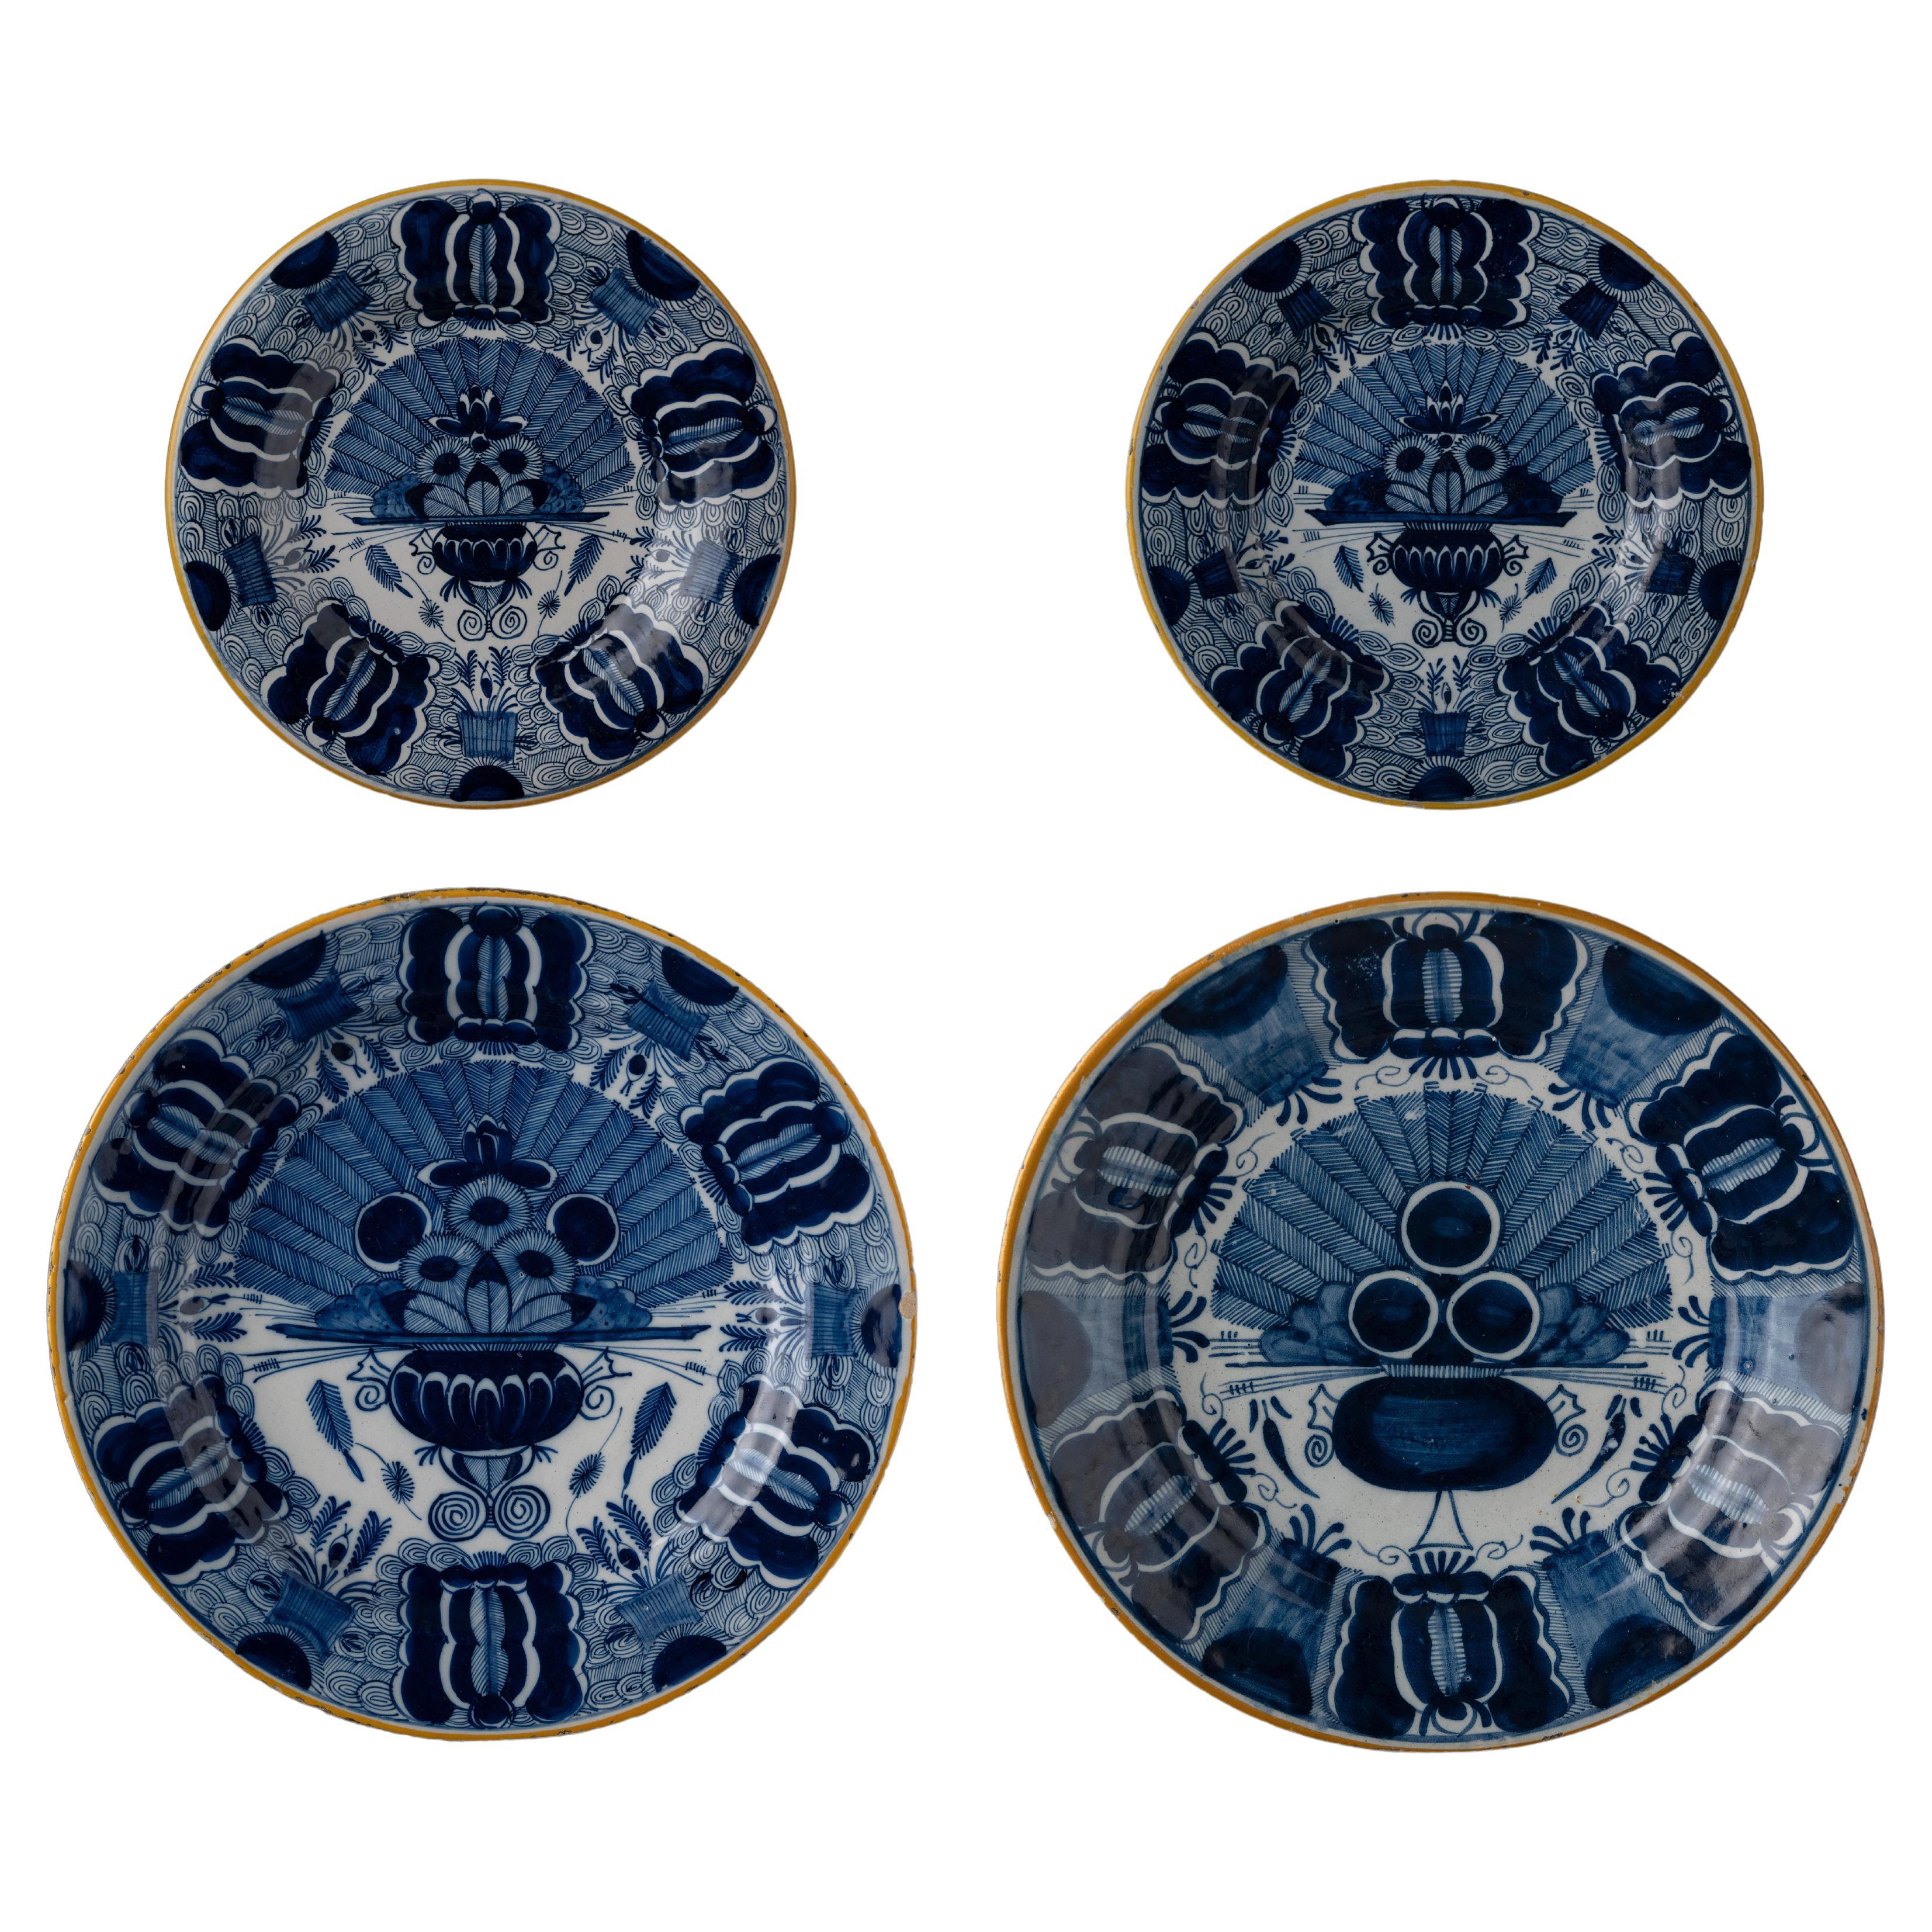 Set of 4 Delft Plates and Dishes Hand-Painted with "Peacock" Pattern 1750-1800